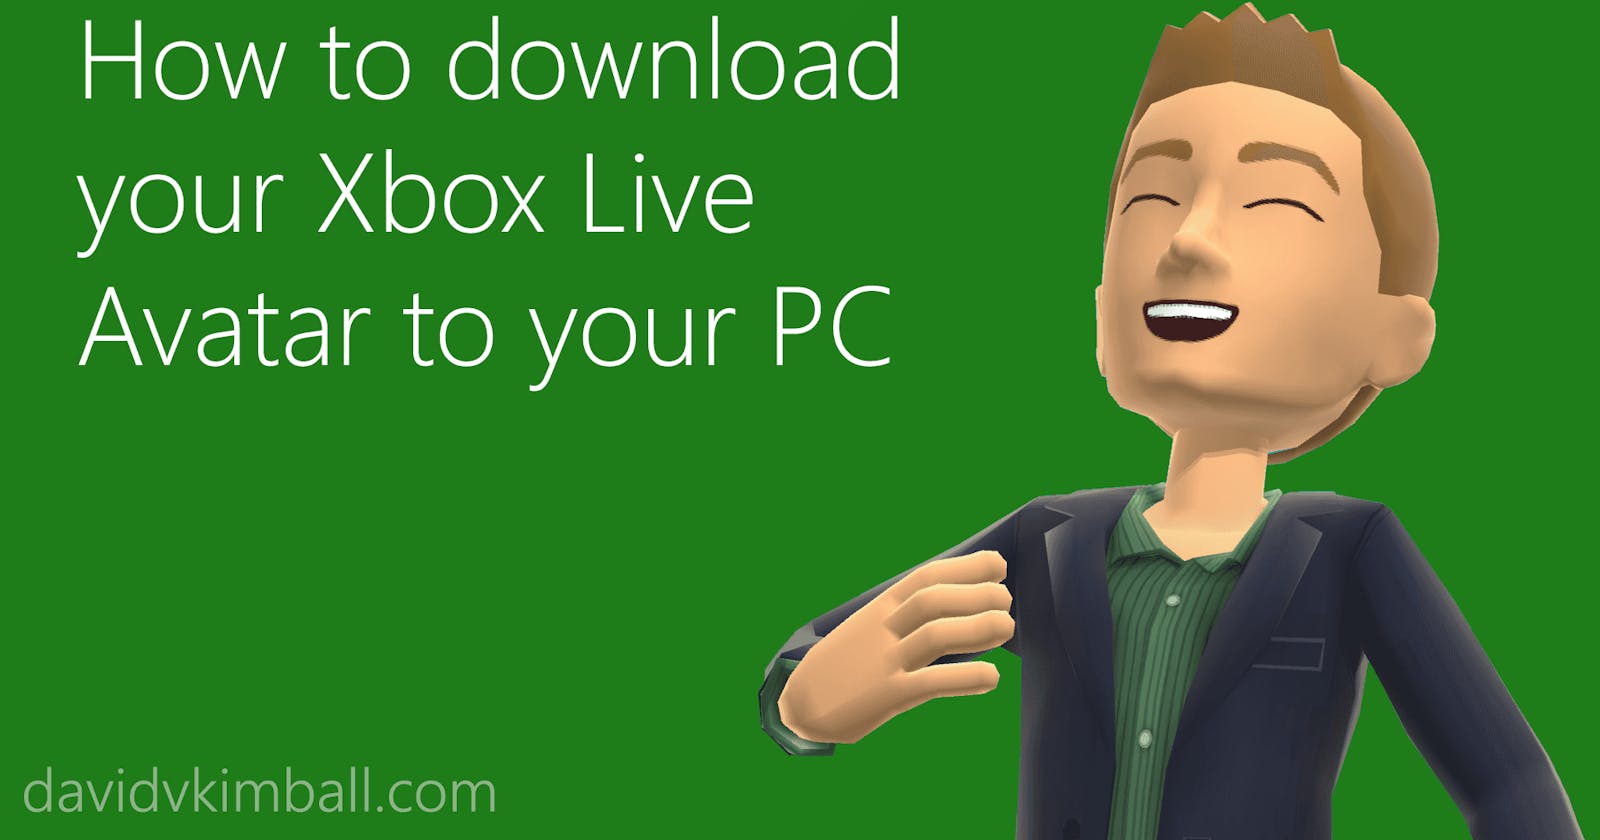 How to Download your Xbox Live Avatar to your PC